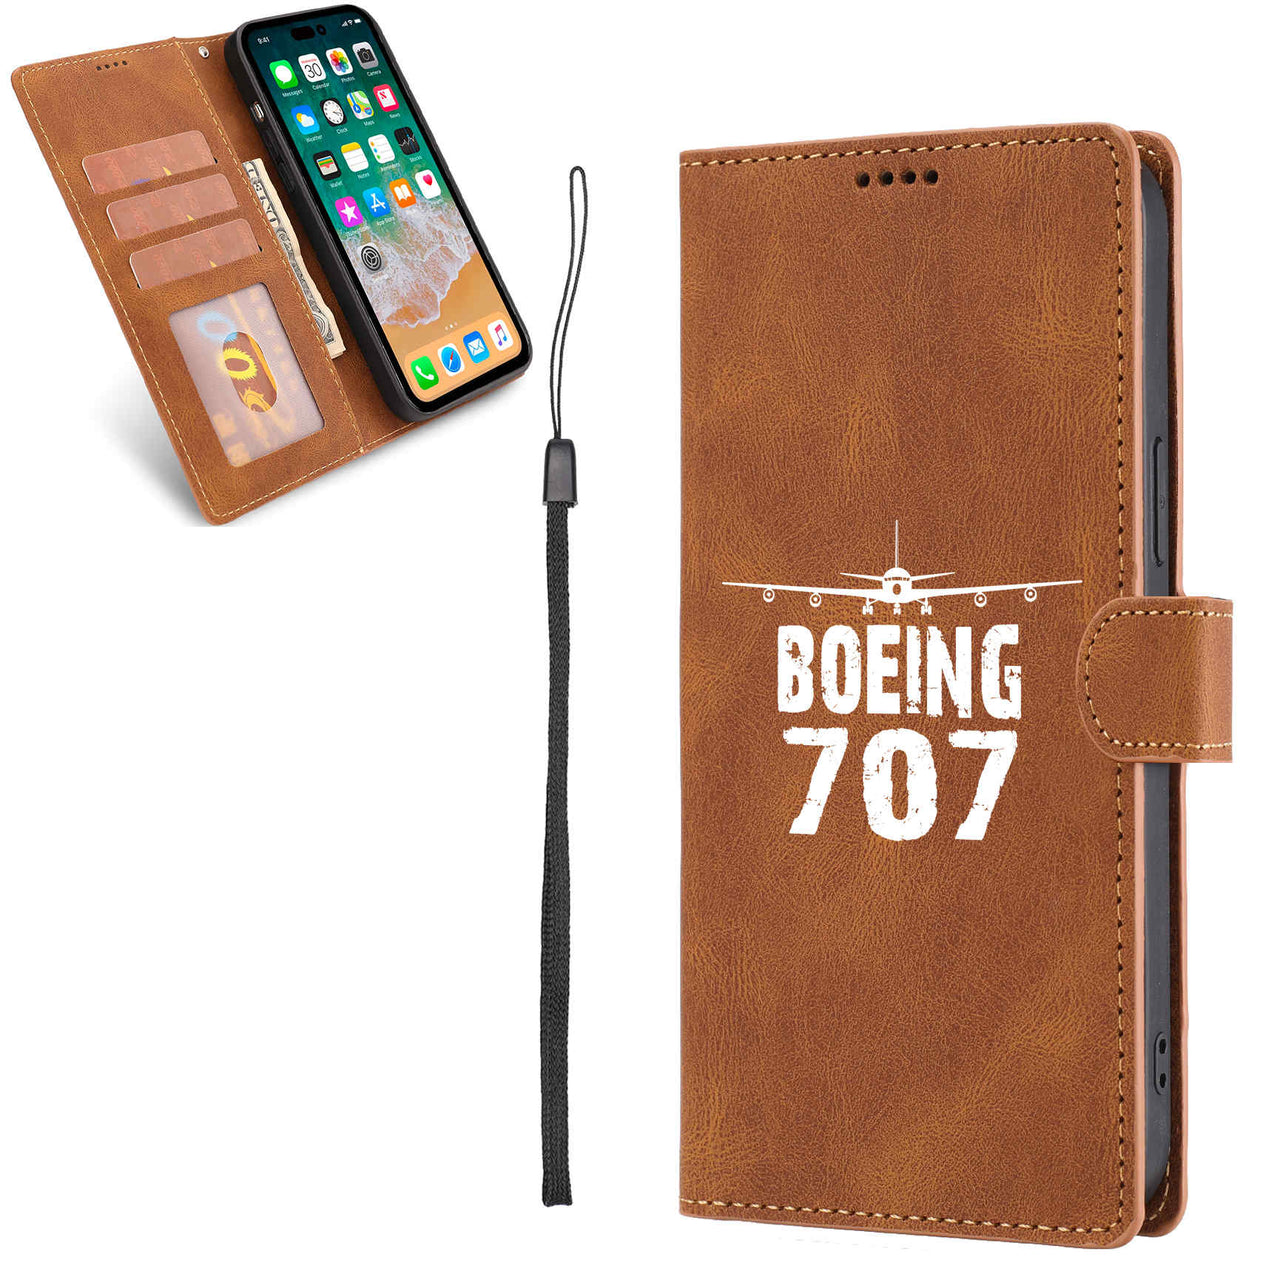 Boeing 707 & Plane Designed Leather Samsung S & Note Cases